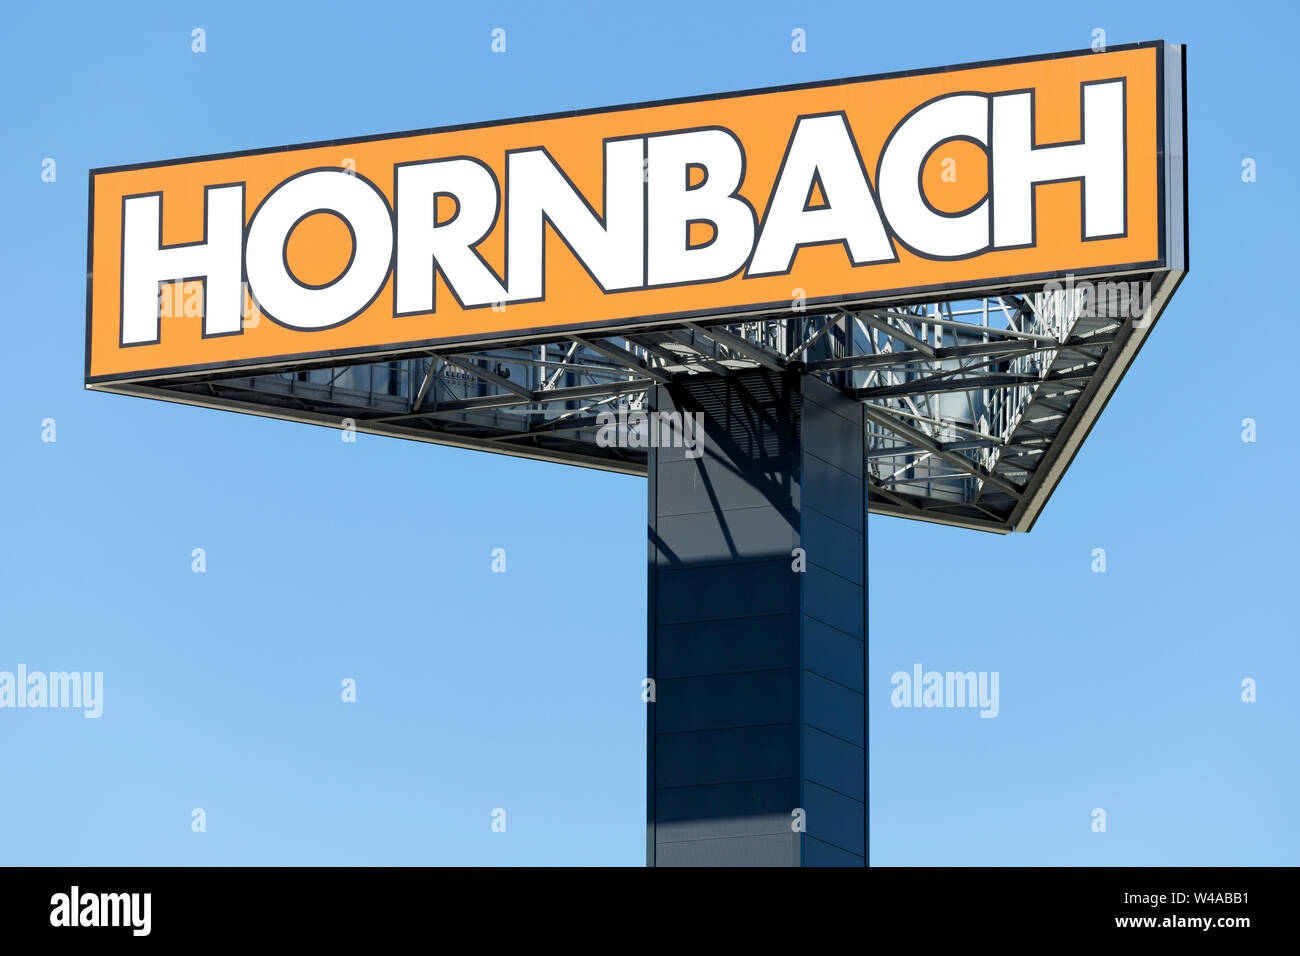 Hornbach sign against blue sky. Hornbach is a German DIY-store chain offering home improvement and do-it-yourself goods. Stock Photo